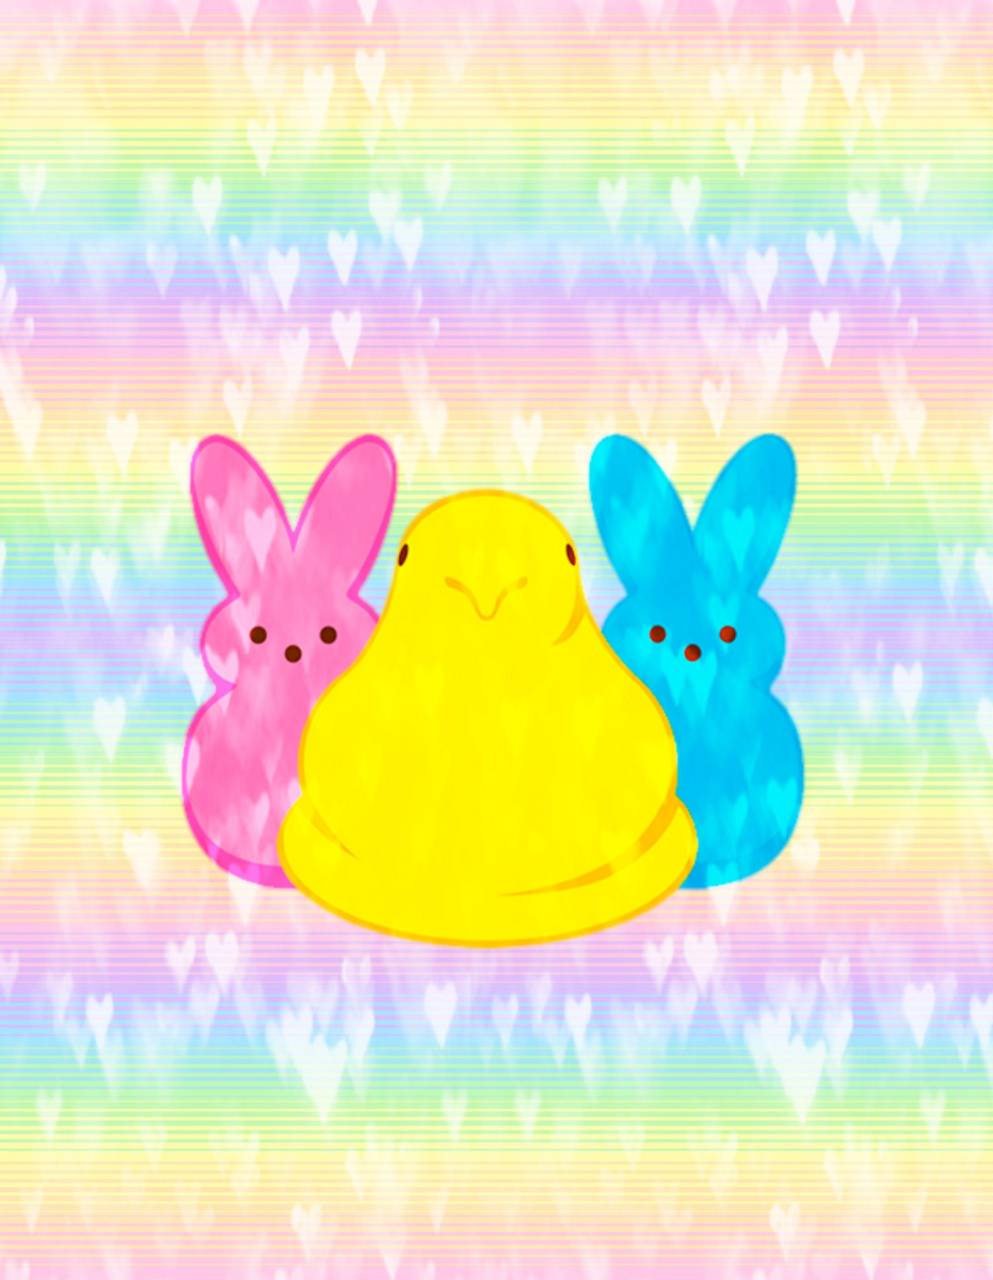 A cute pink and yellow peeps with two bunnies - Easter